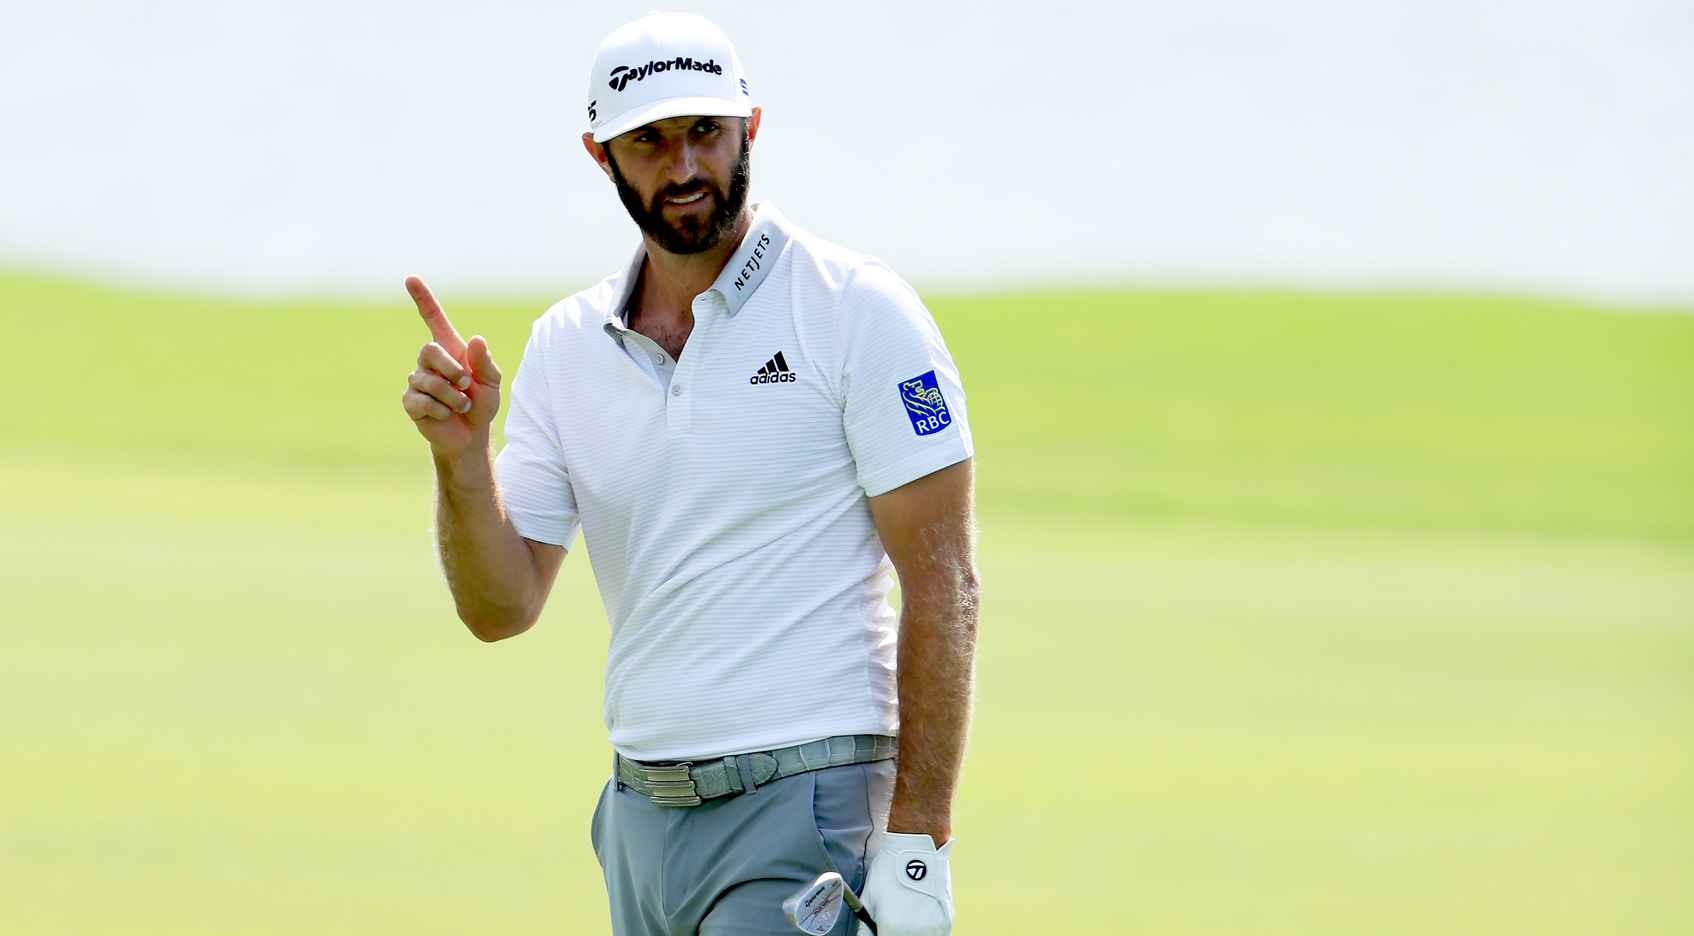 Dustin Johnson turns rough day into one-shot lead at TOUR Championship